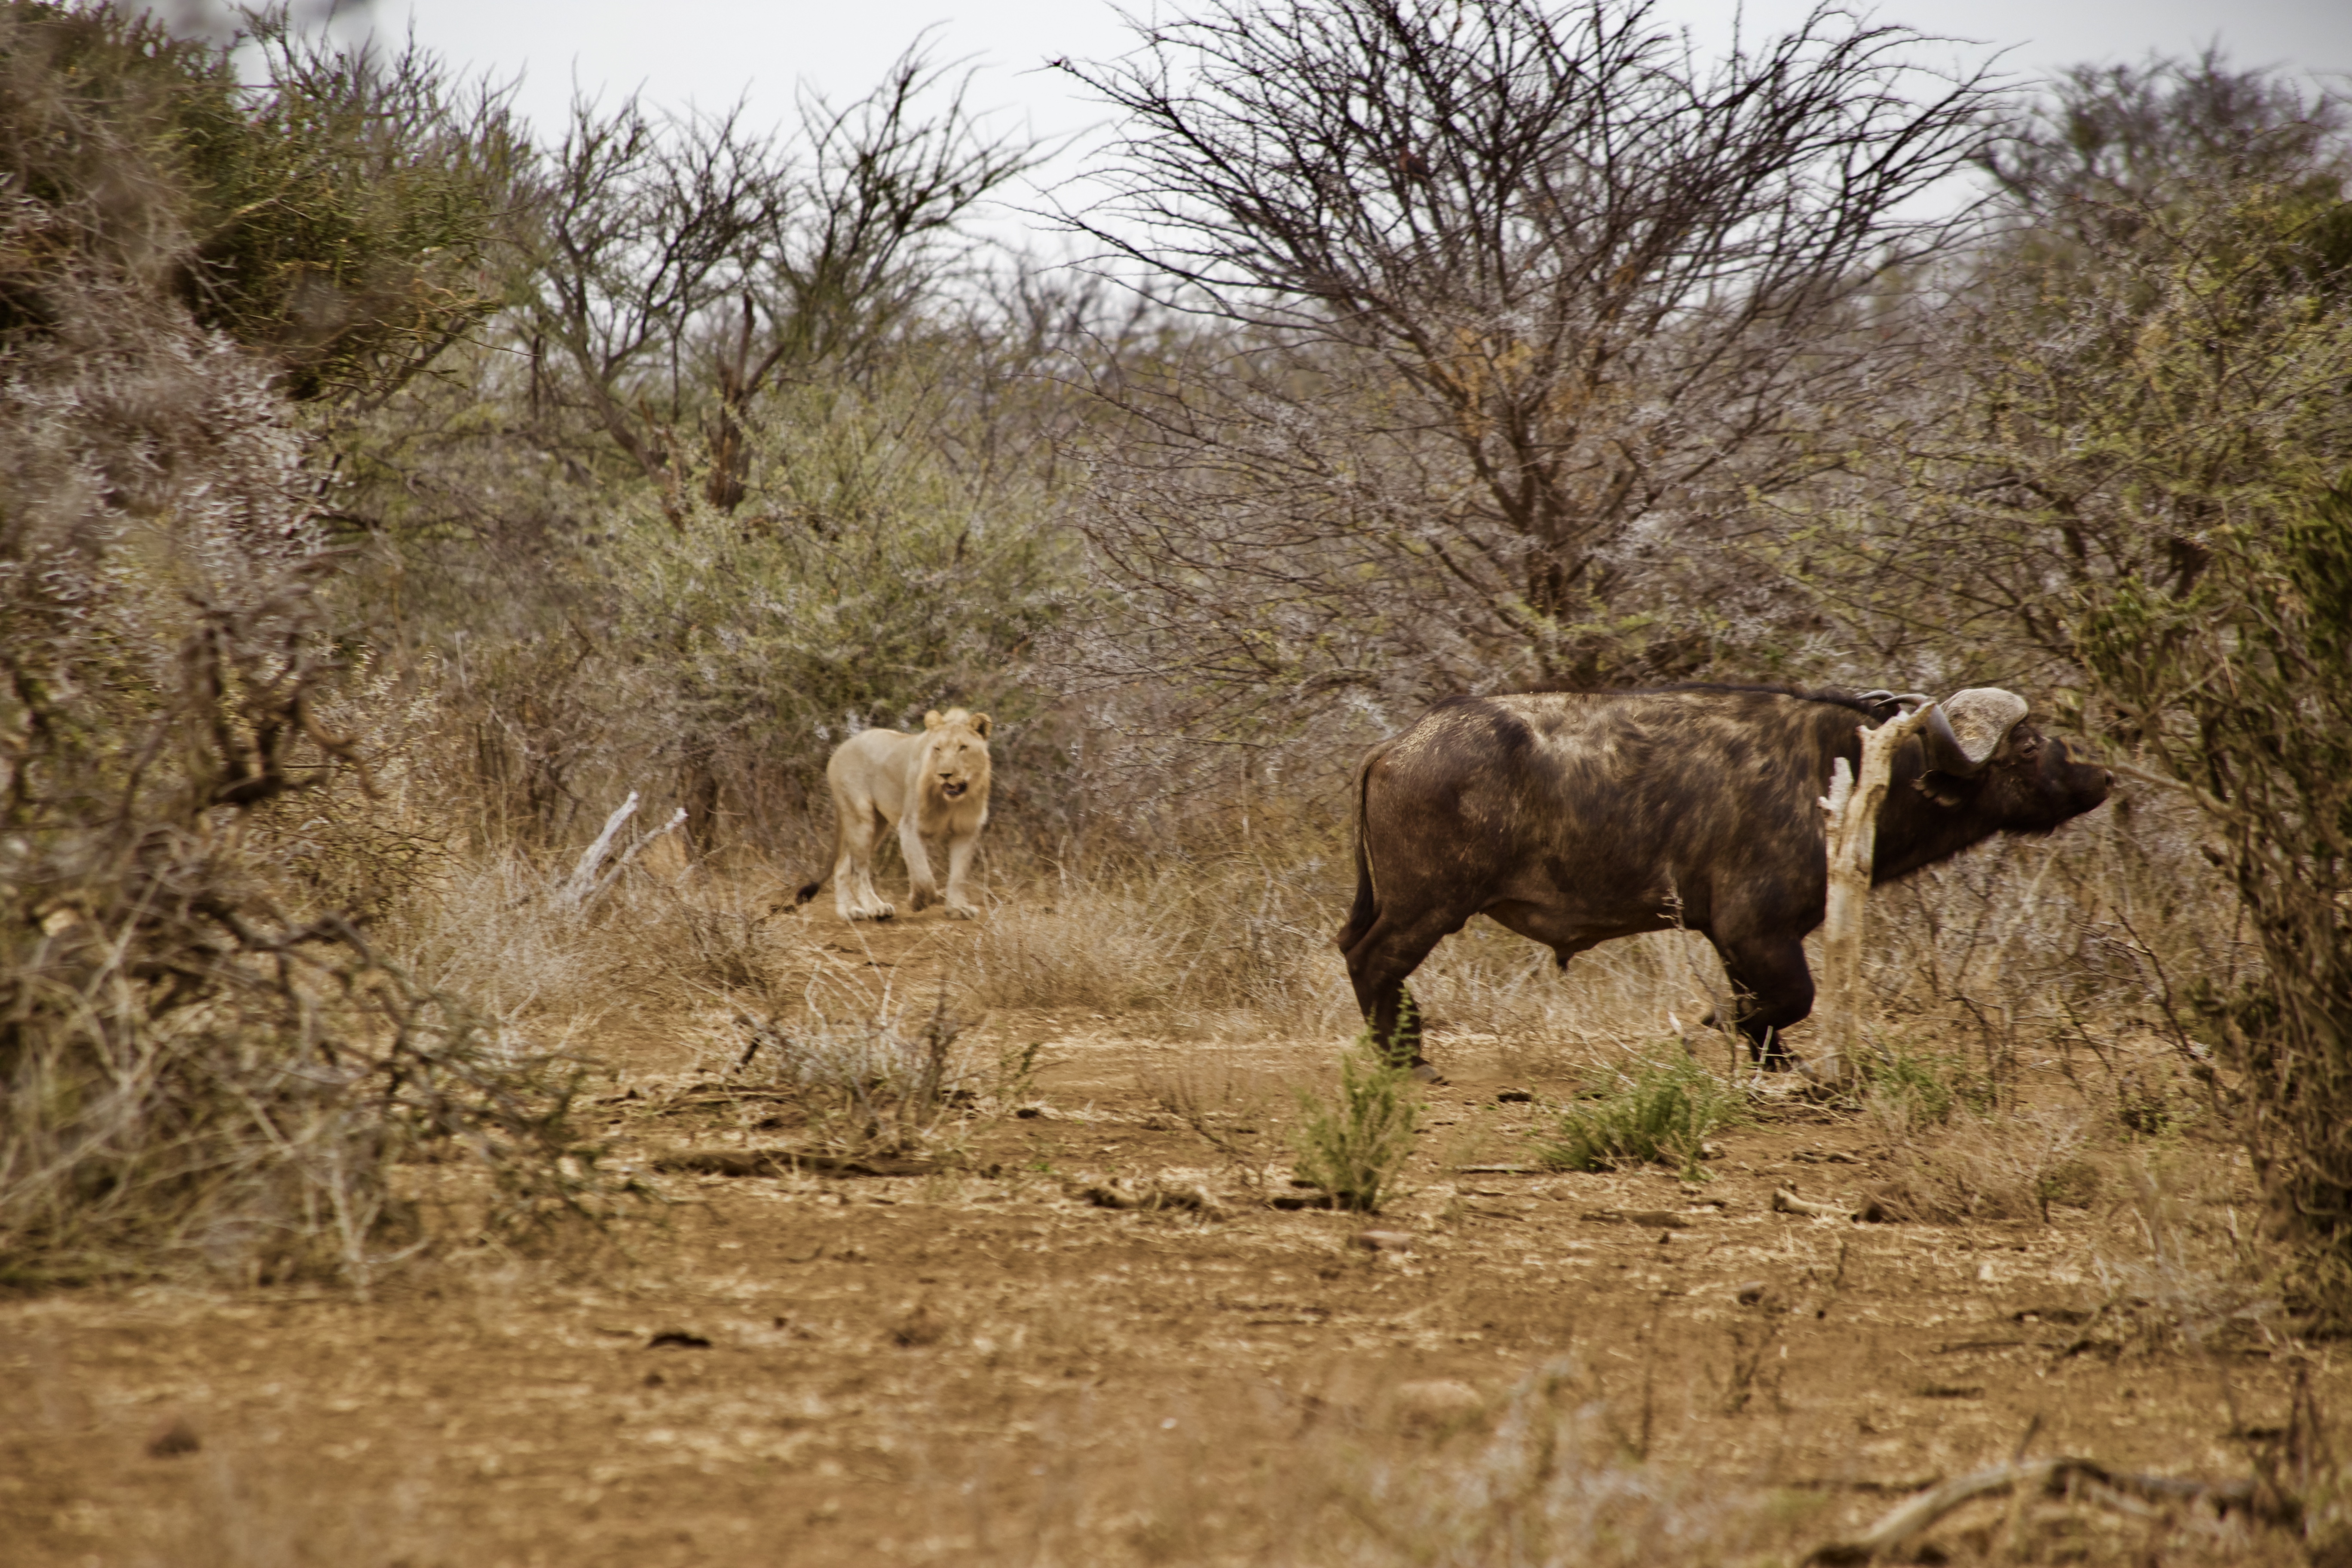 Lions hunting a herd of buffalos